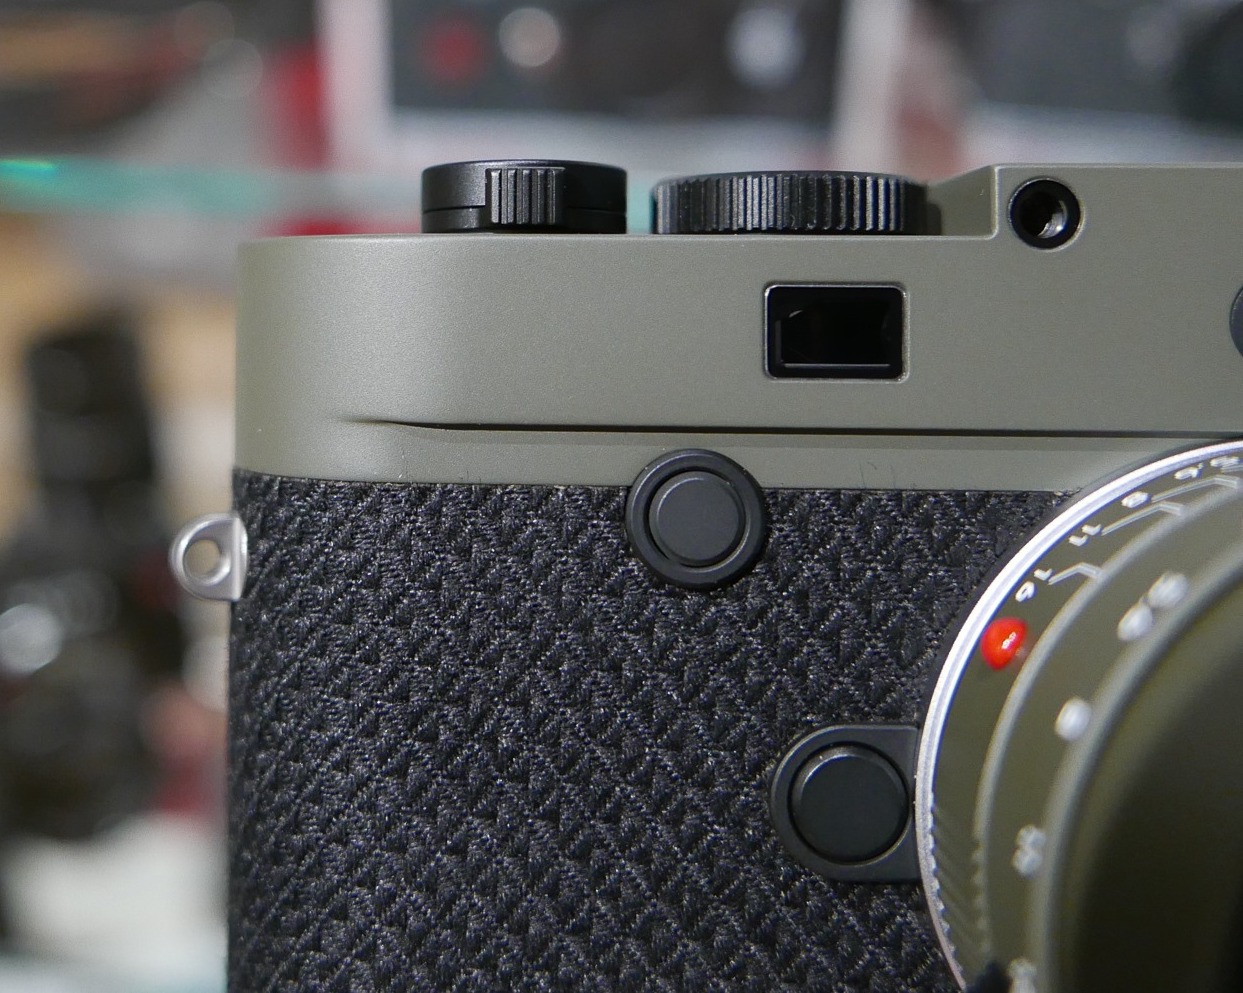 Leica M10-P “Reporter” limited edition camera unboxing - Leica Rumors